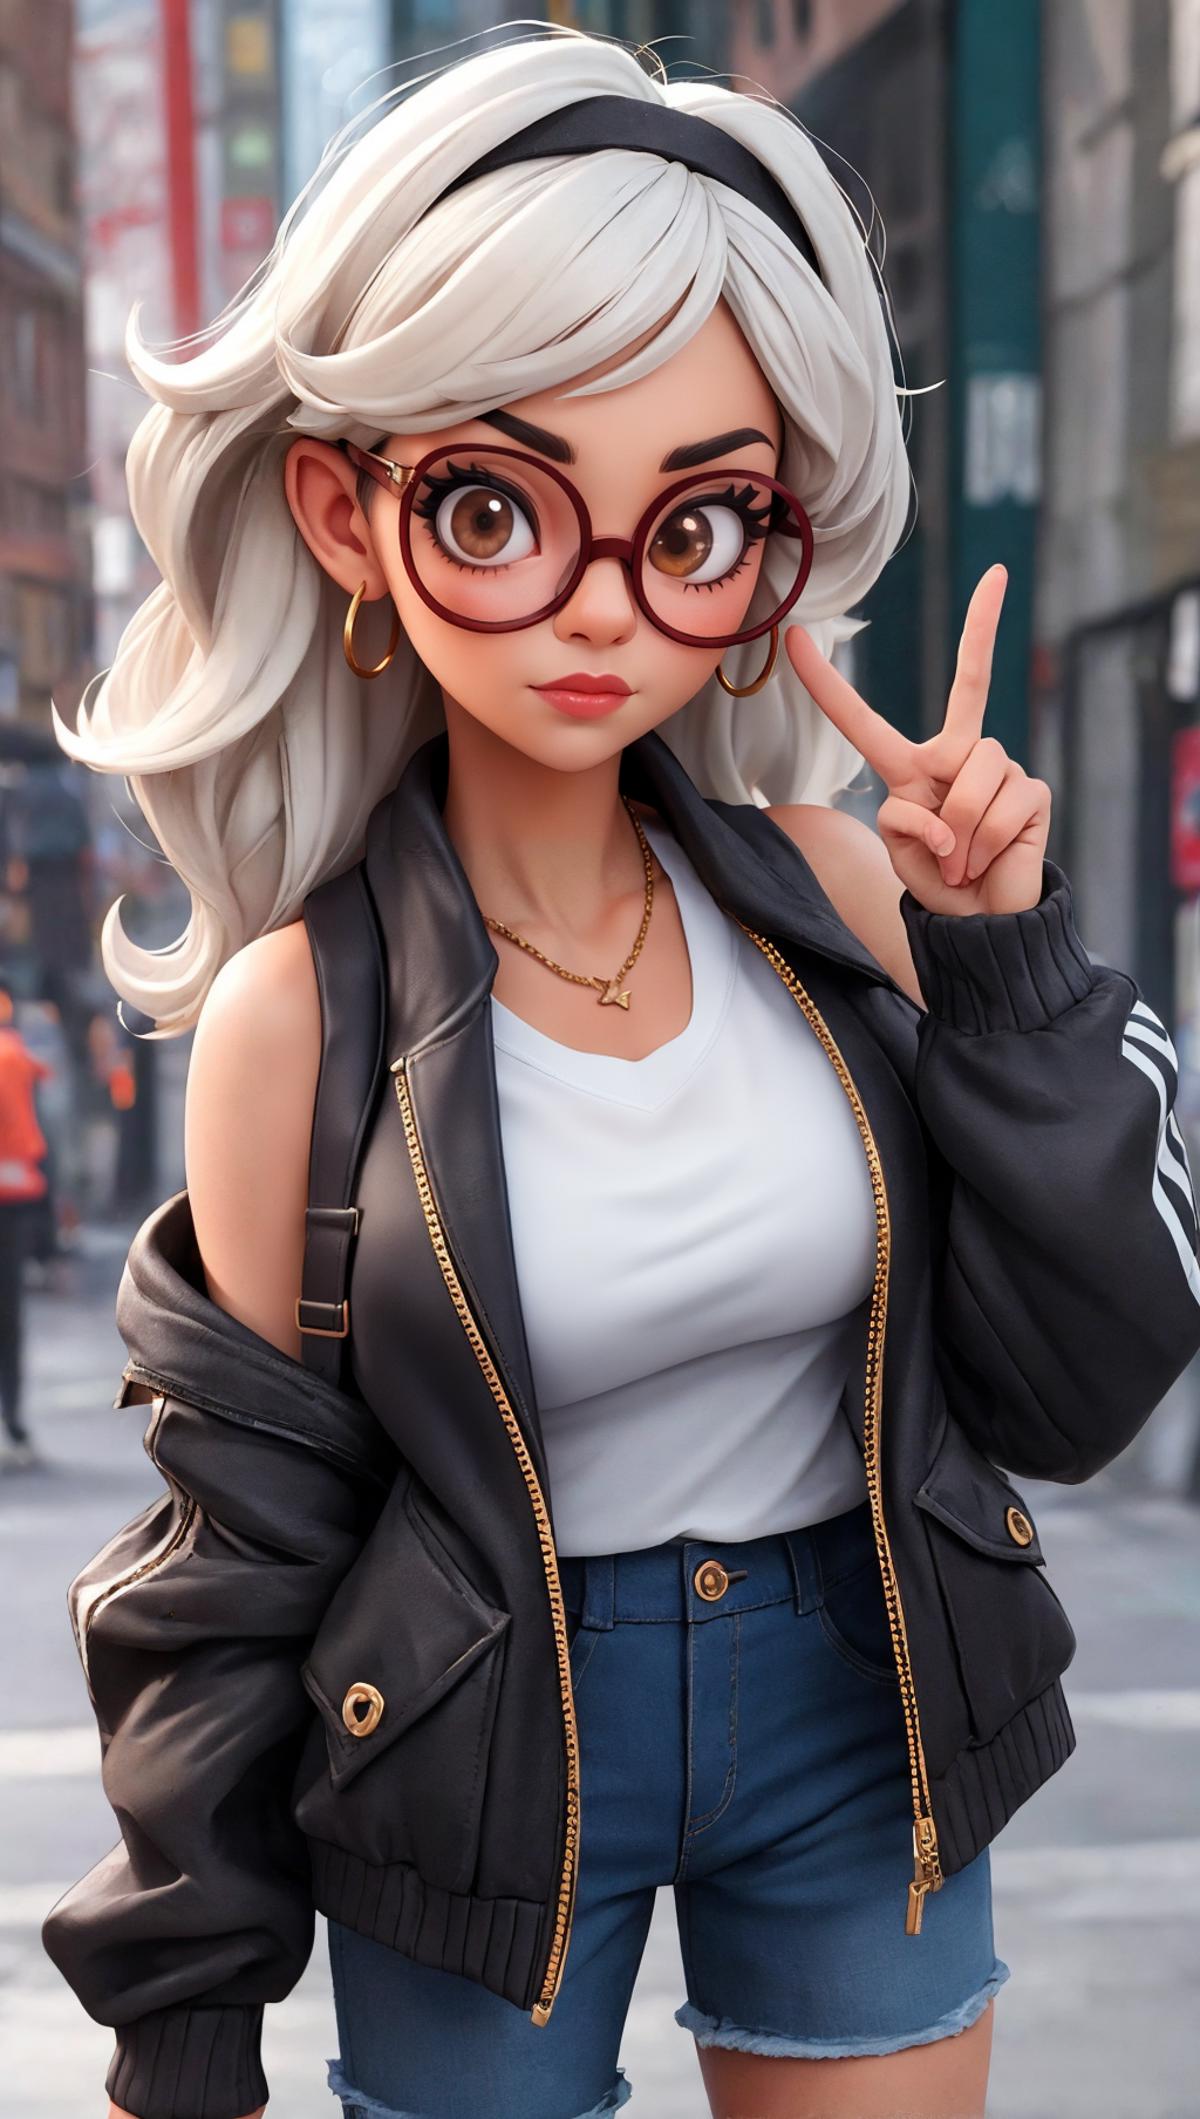 A cartoon woman wearing a black leather jacket and glasses.